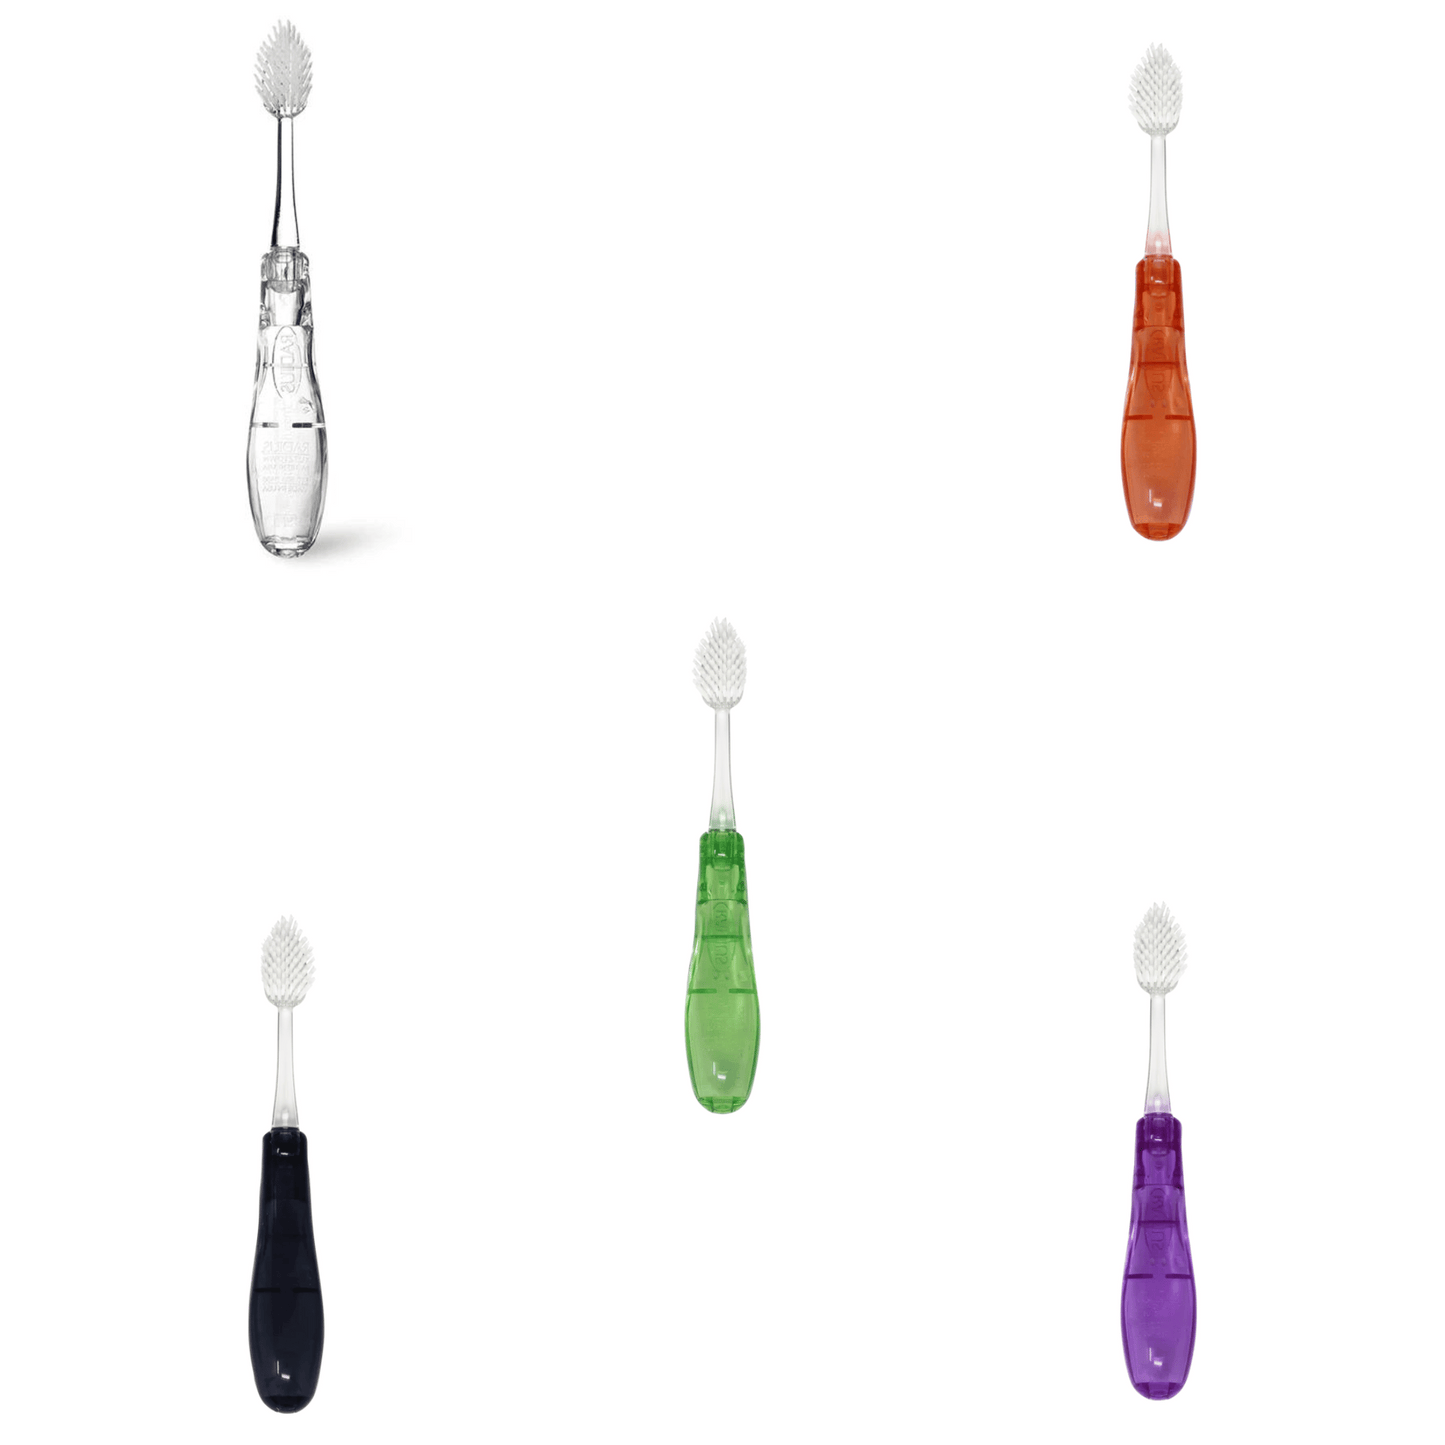 Primary Image of Tour Travel Toothbrush